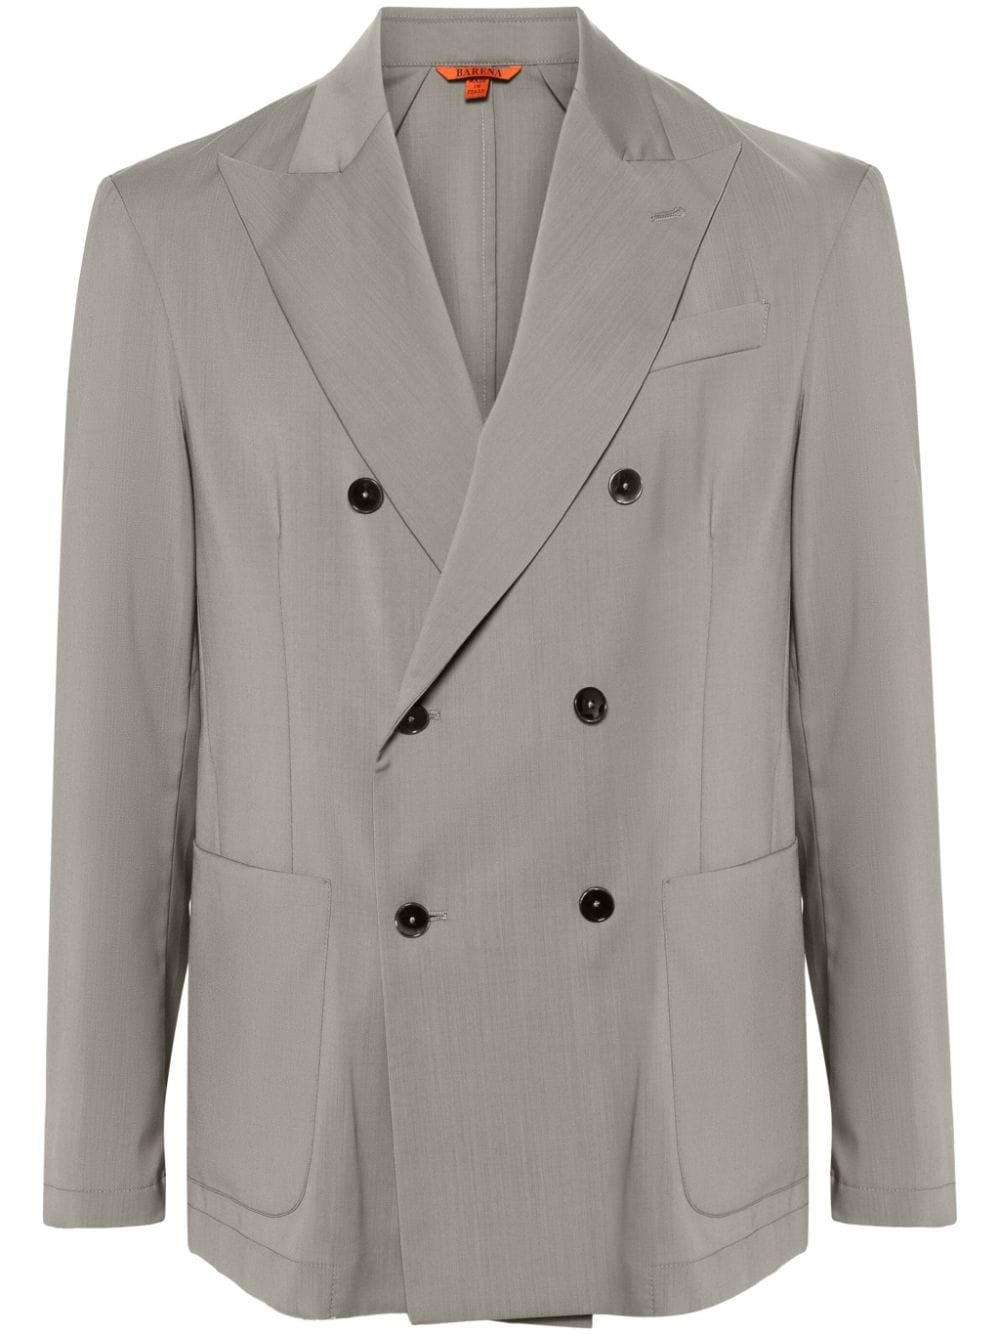 Gray double-breasted blazer